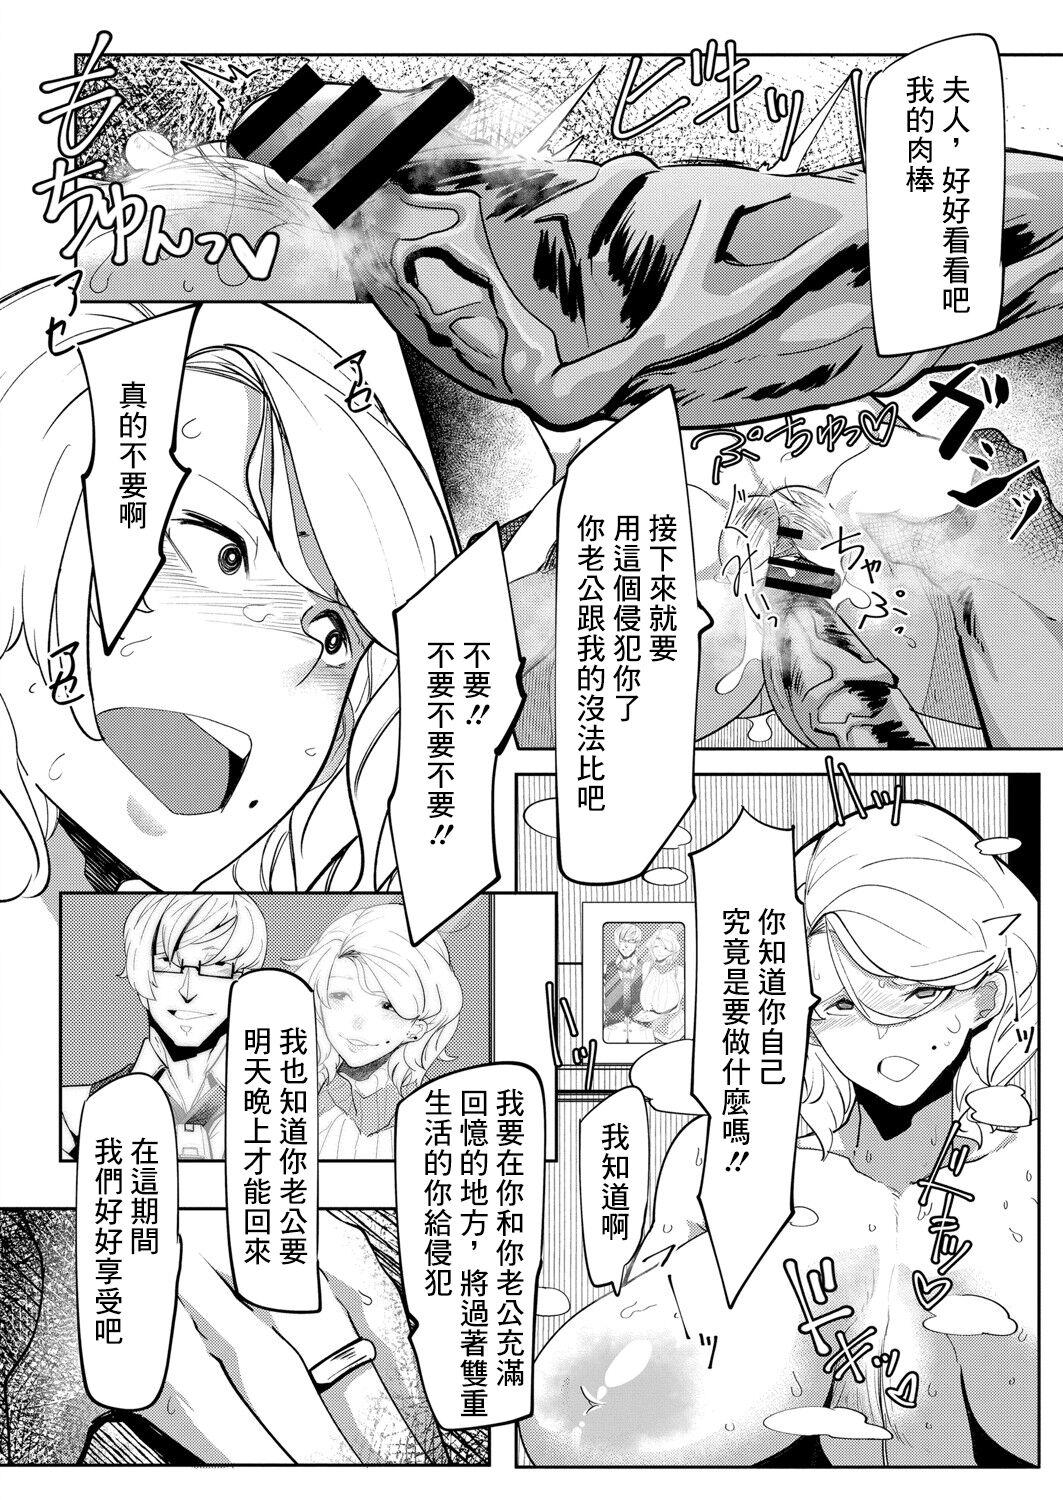 HERO DAY TIME Ch. 2 9